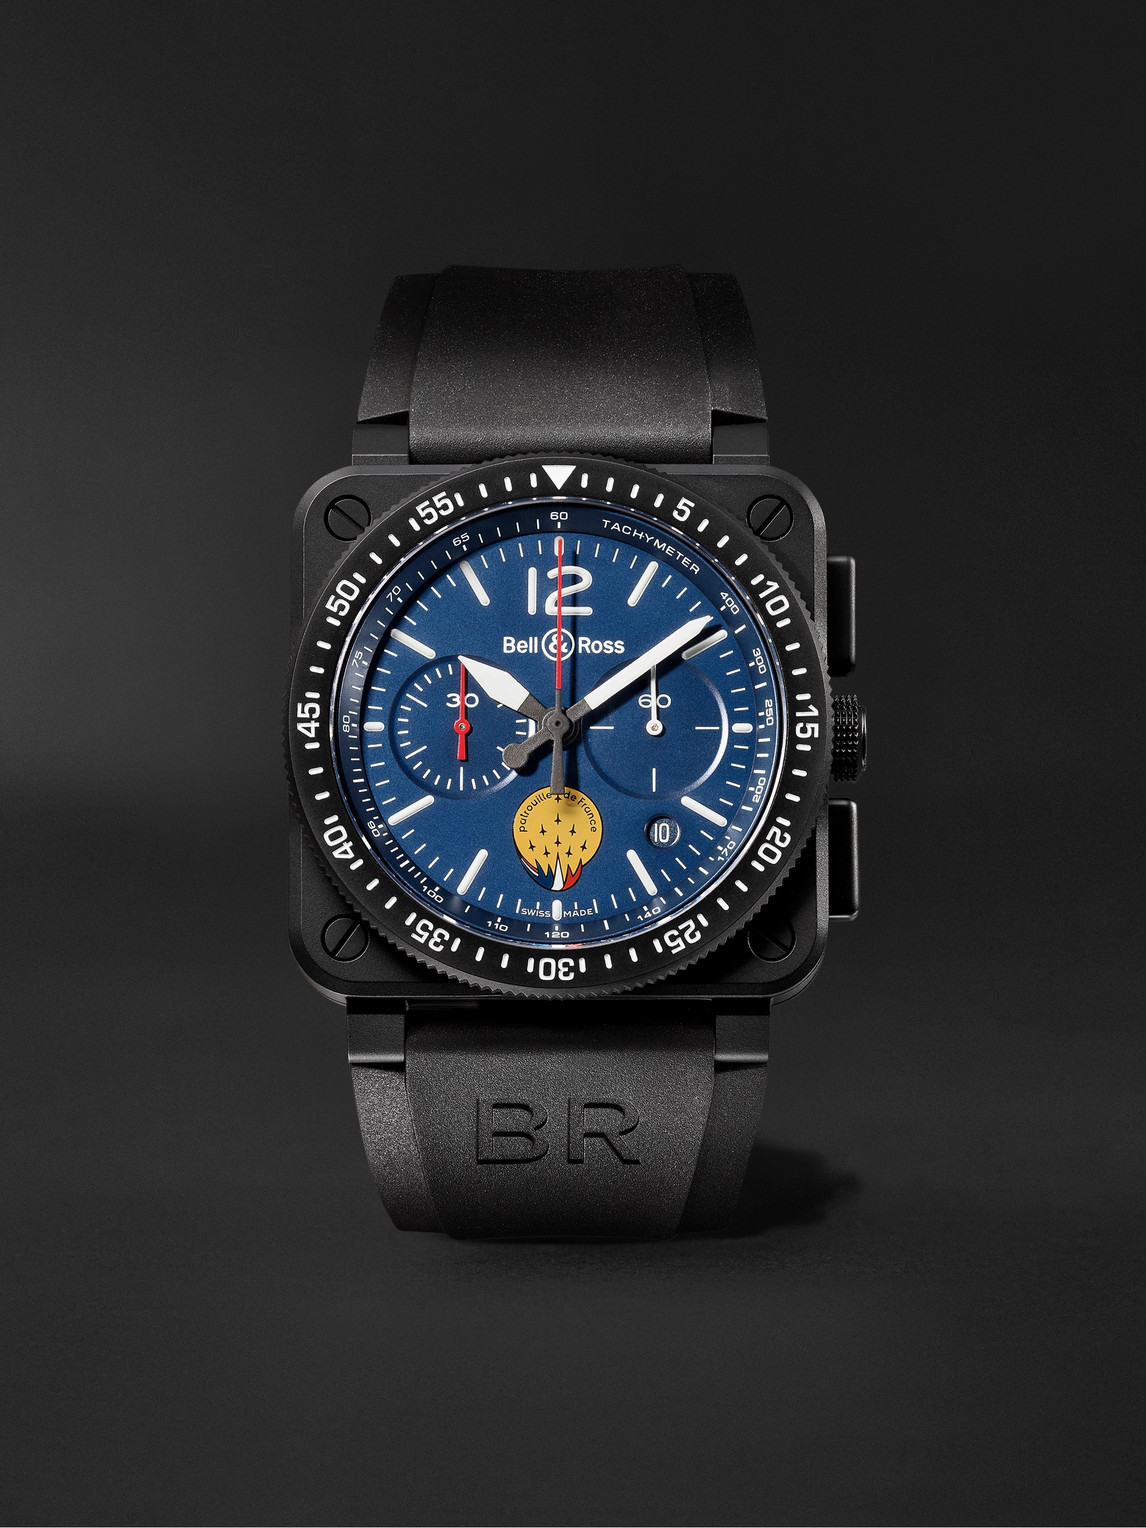 Bell & Ross Br 03-94 Patrouille De France Limited Edition Chronograph Ceramic And Rubber Watch, Ref. No. Br0394- In Blue